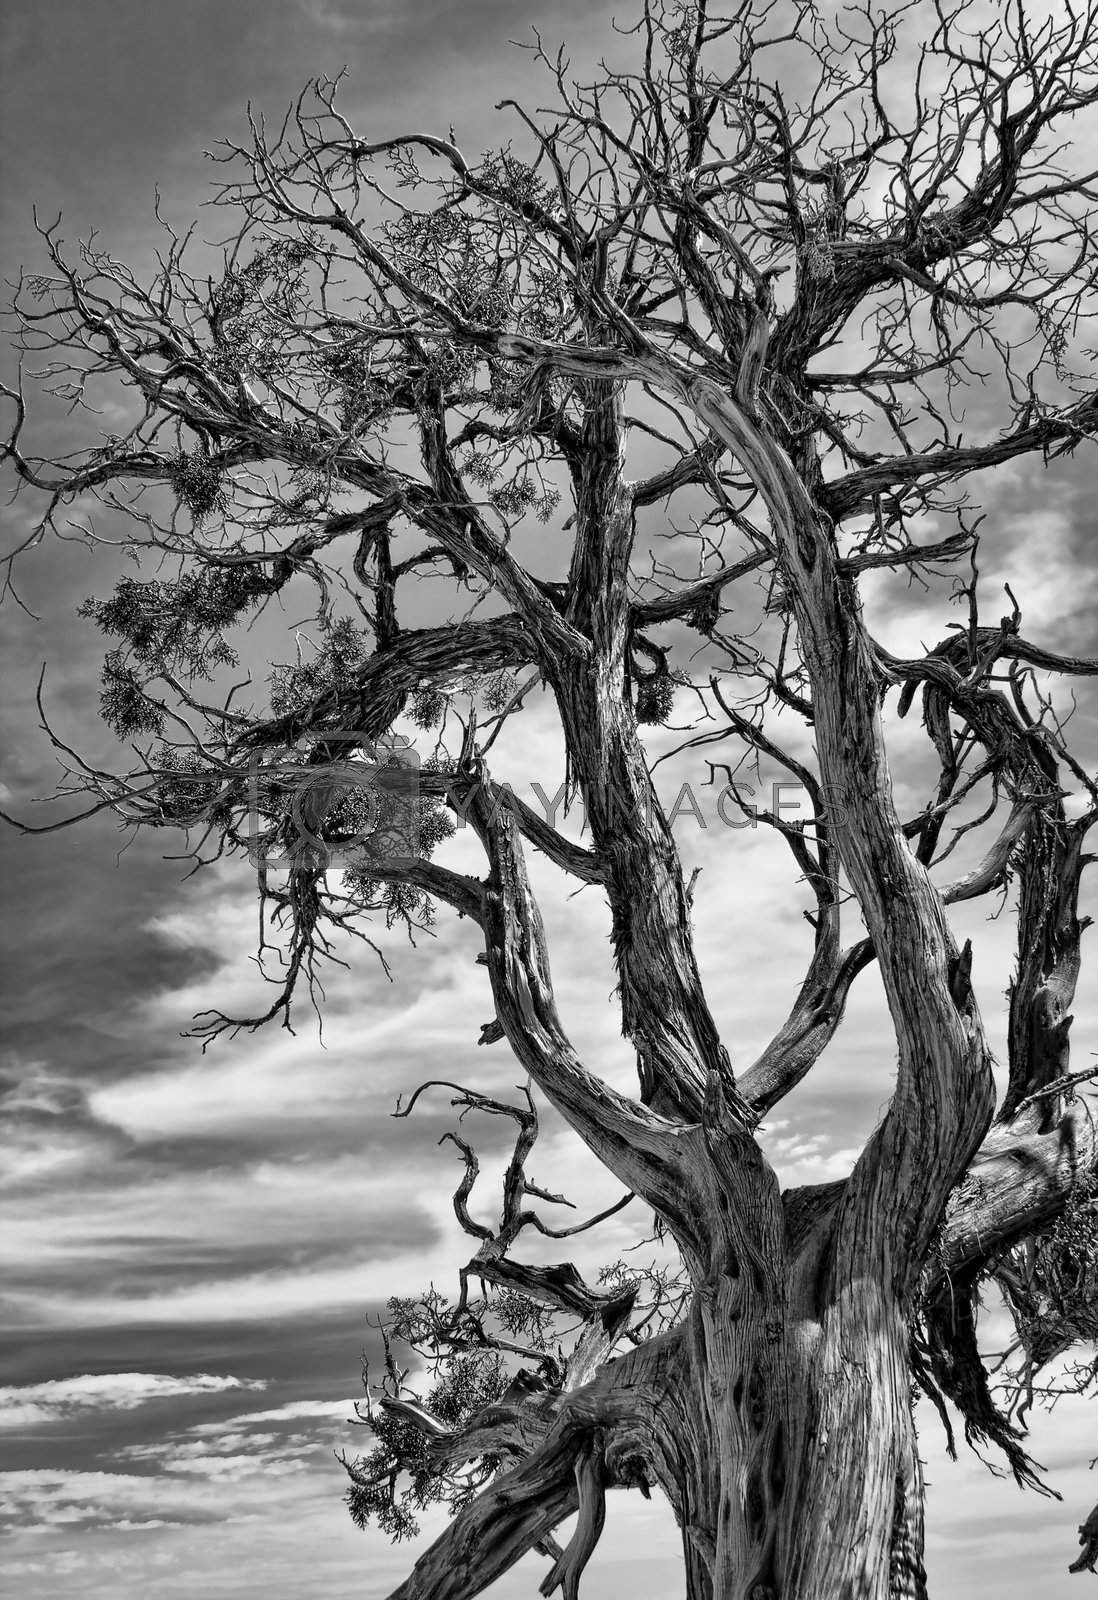 Royalty free image of Dramatic Picture of a Dead Tree. by diro